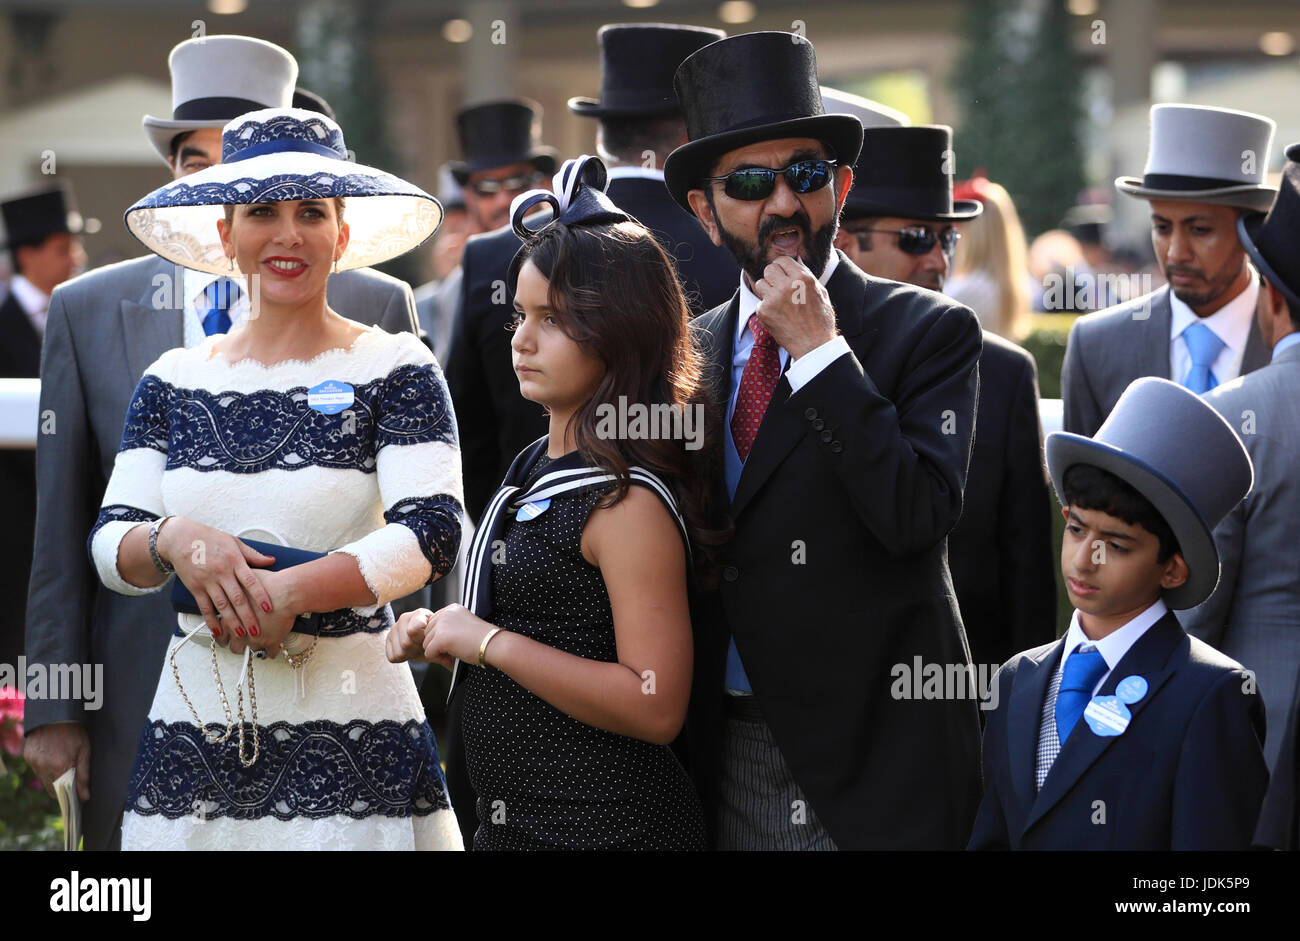 Sheikh Mohammed Bin Rashid Al Maktoum And Princess Haya Bint Al Hussein Of Jordan Left With Family In The Winners Encloser During Day One Of Royal Ascot At Ascot Racecourse Stock Photo